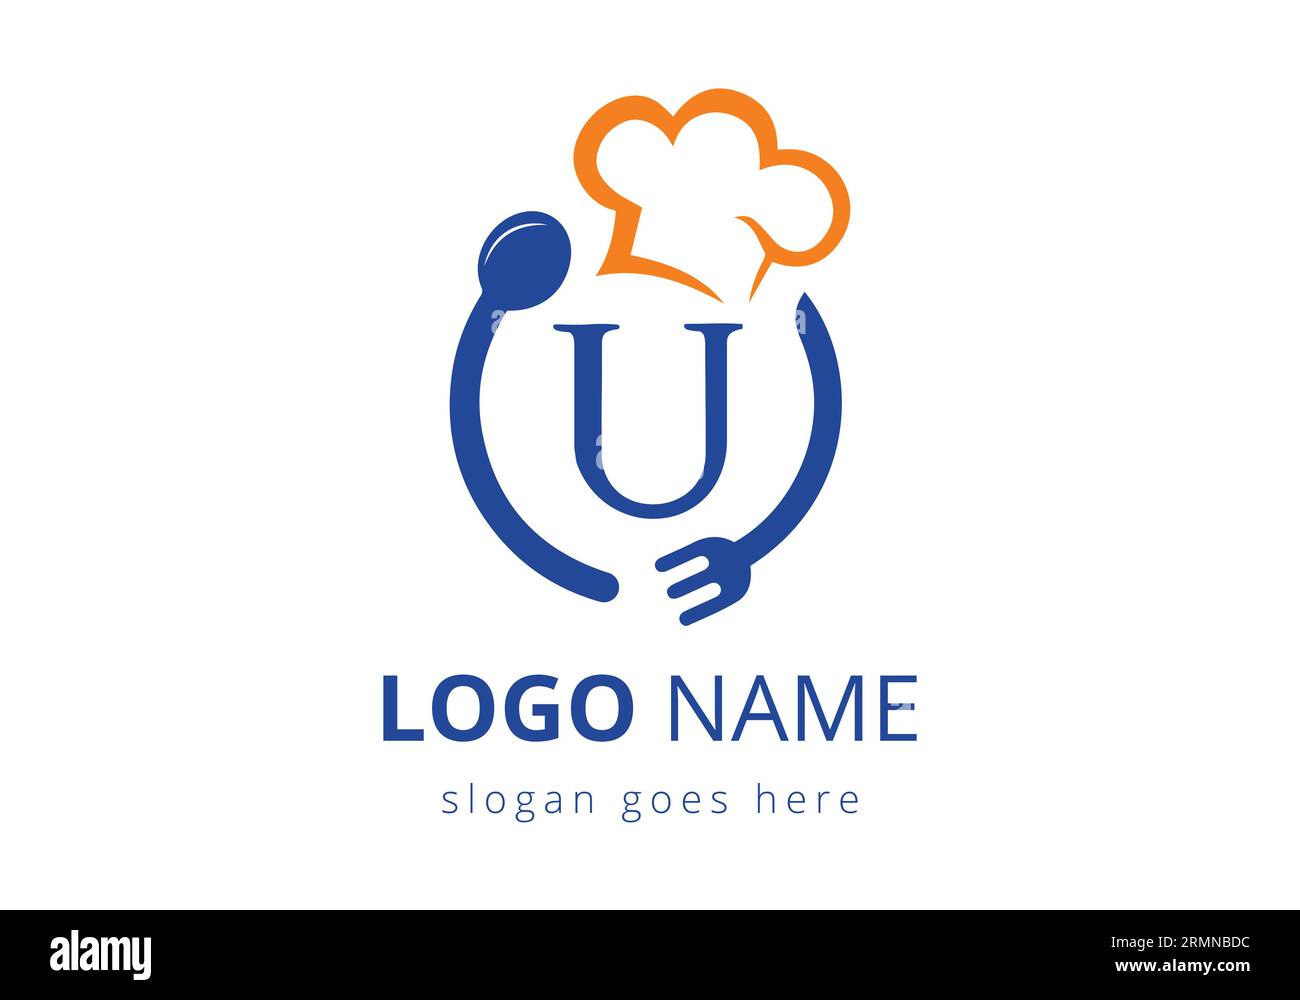 Letter U Logo With Chef Hat, Spoon And Fork For Restaurant Logo. Modern vector logo for cafe, restaurant, cooking business, and company identity Stock Vector